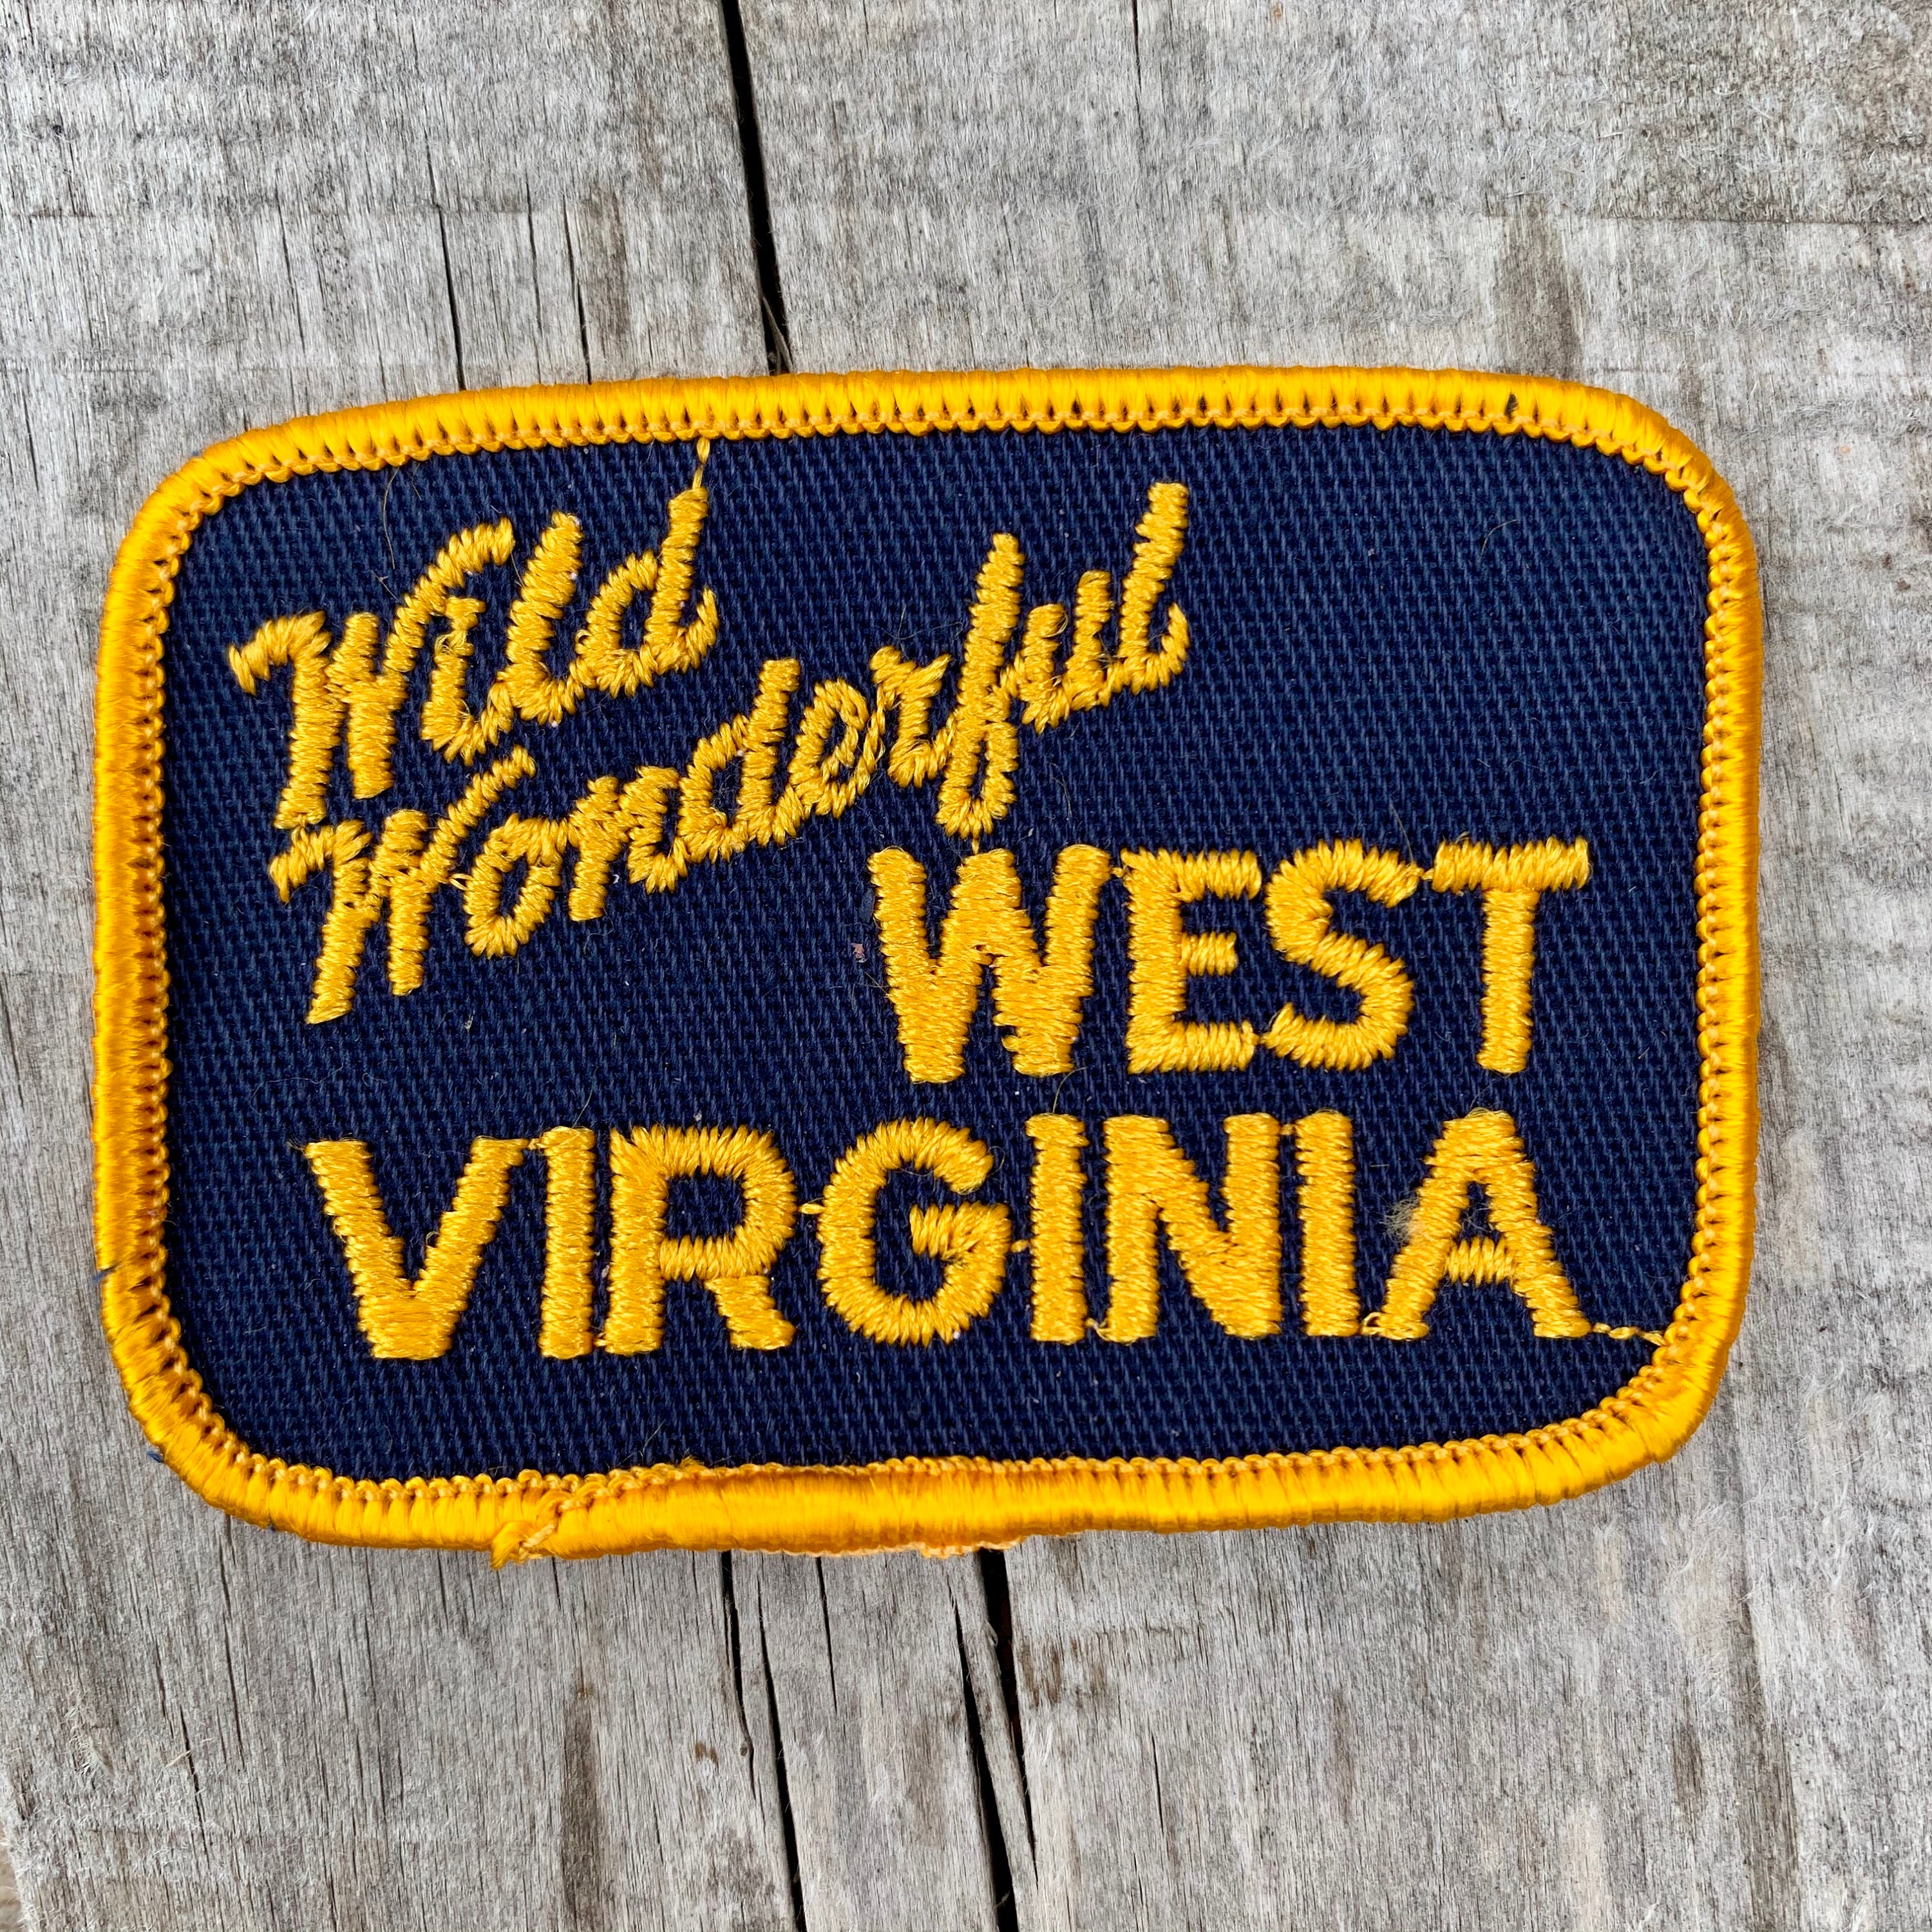 The World Traveler: Vintage Travel Patches - Lil Blue Boo Tutorial